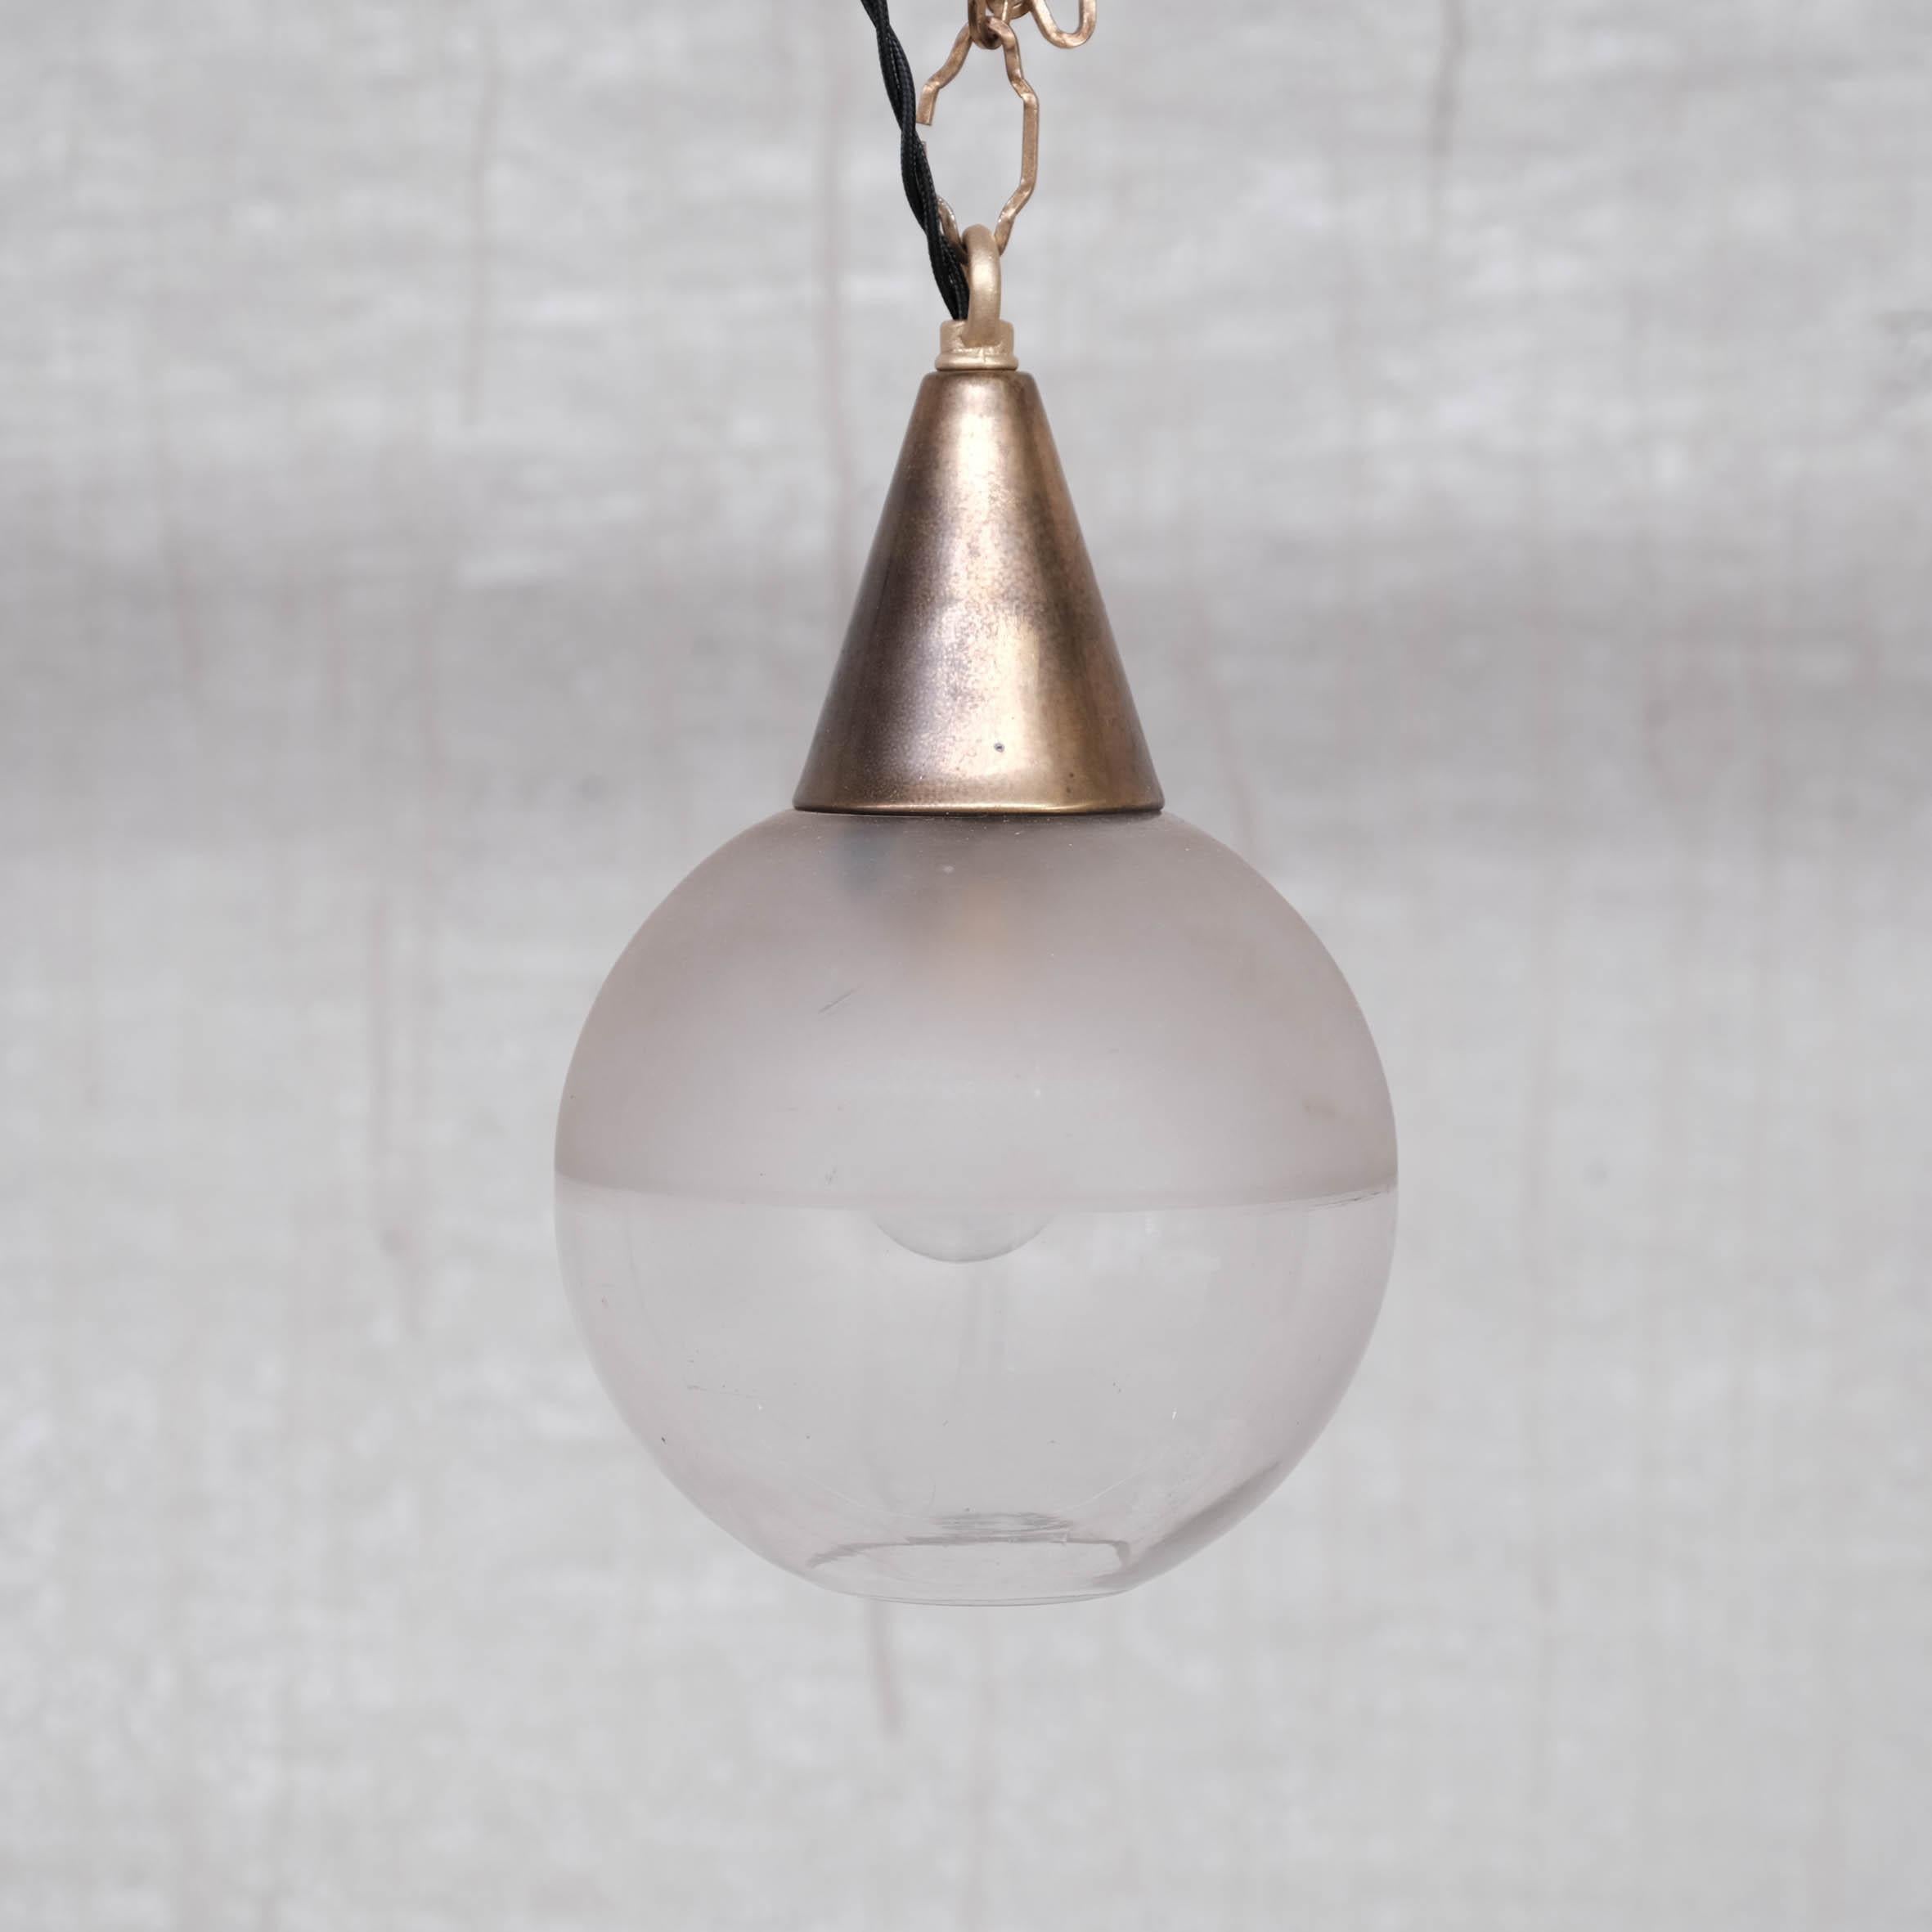 A diminutive two tone pendant light. 

Brass conical gallery, opaque half shade, clear base shade. 

France, c1920s. 

Open at the base. 

Good condition. 

Re-wired and PAT tested. 

No original chain or ceiling rose was retained with